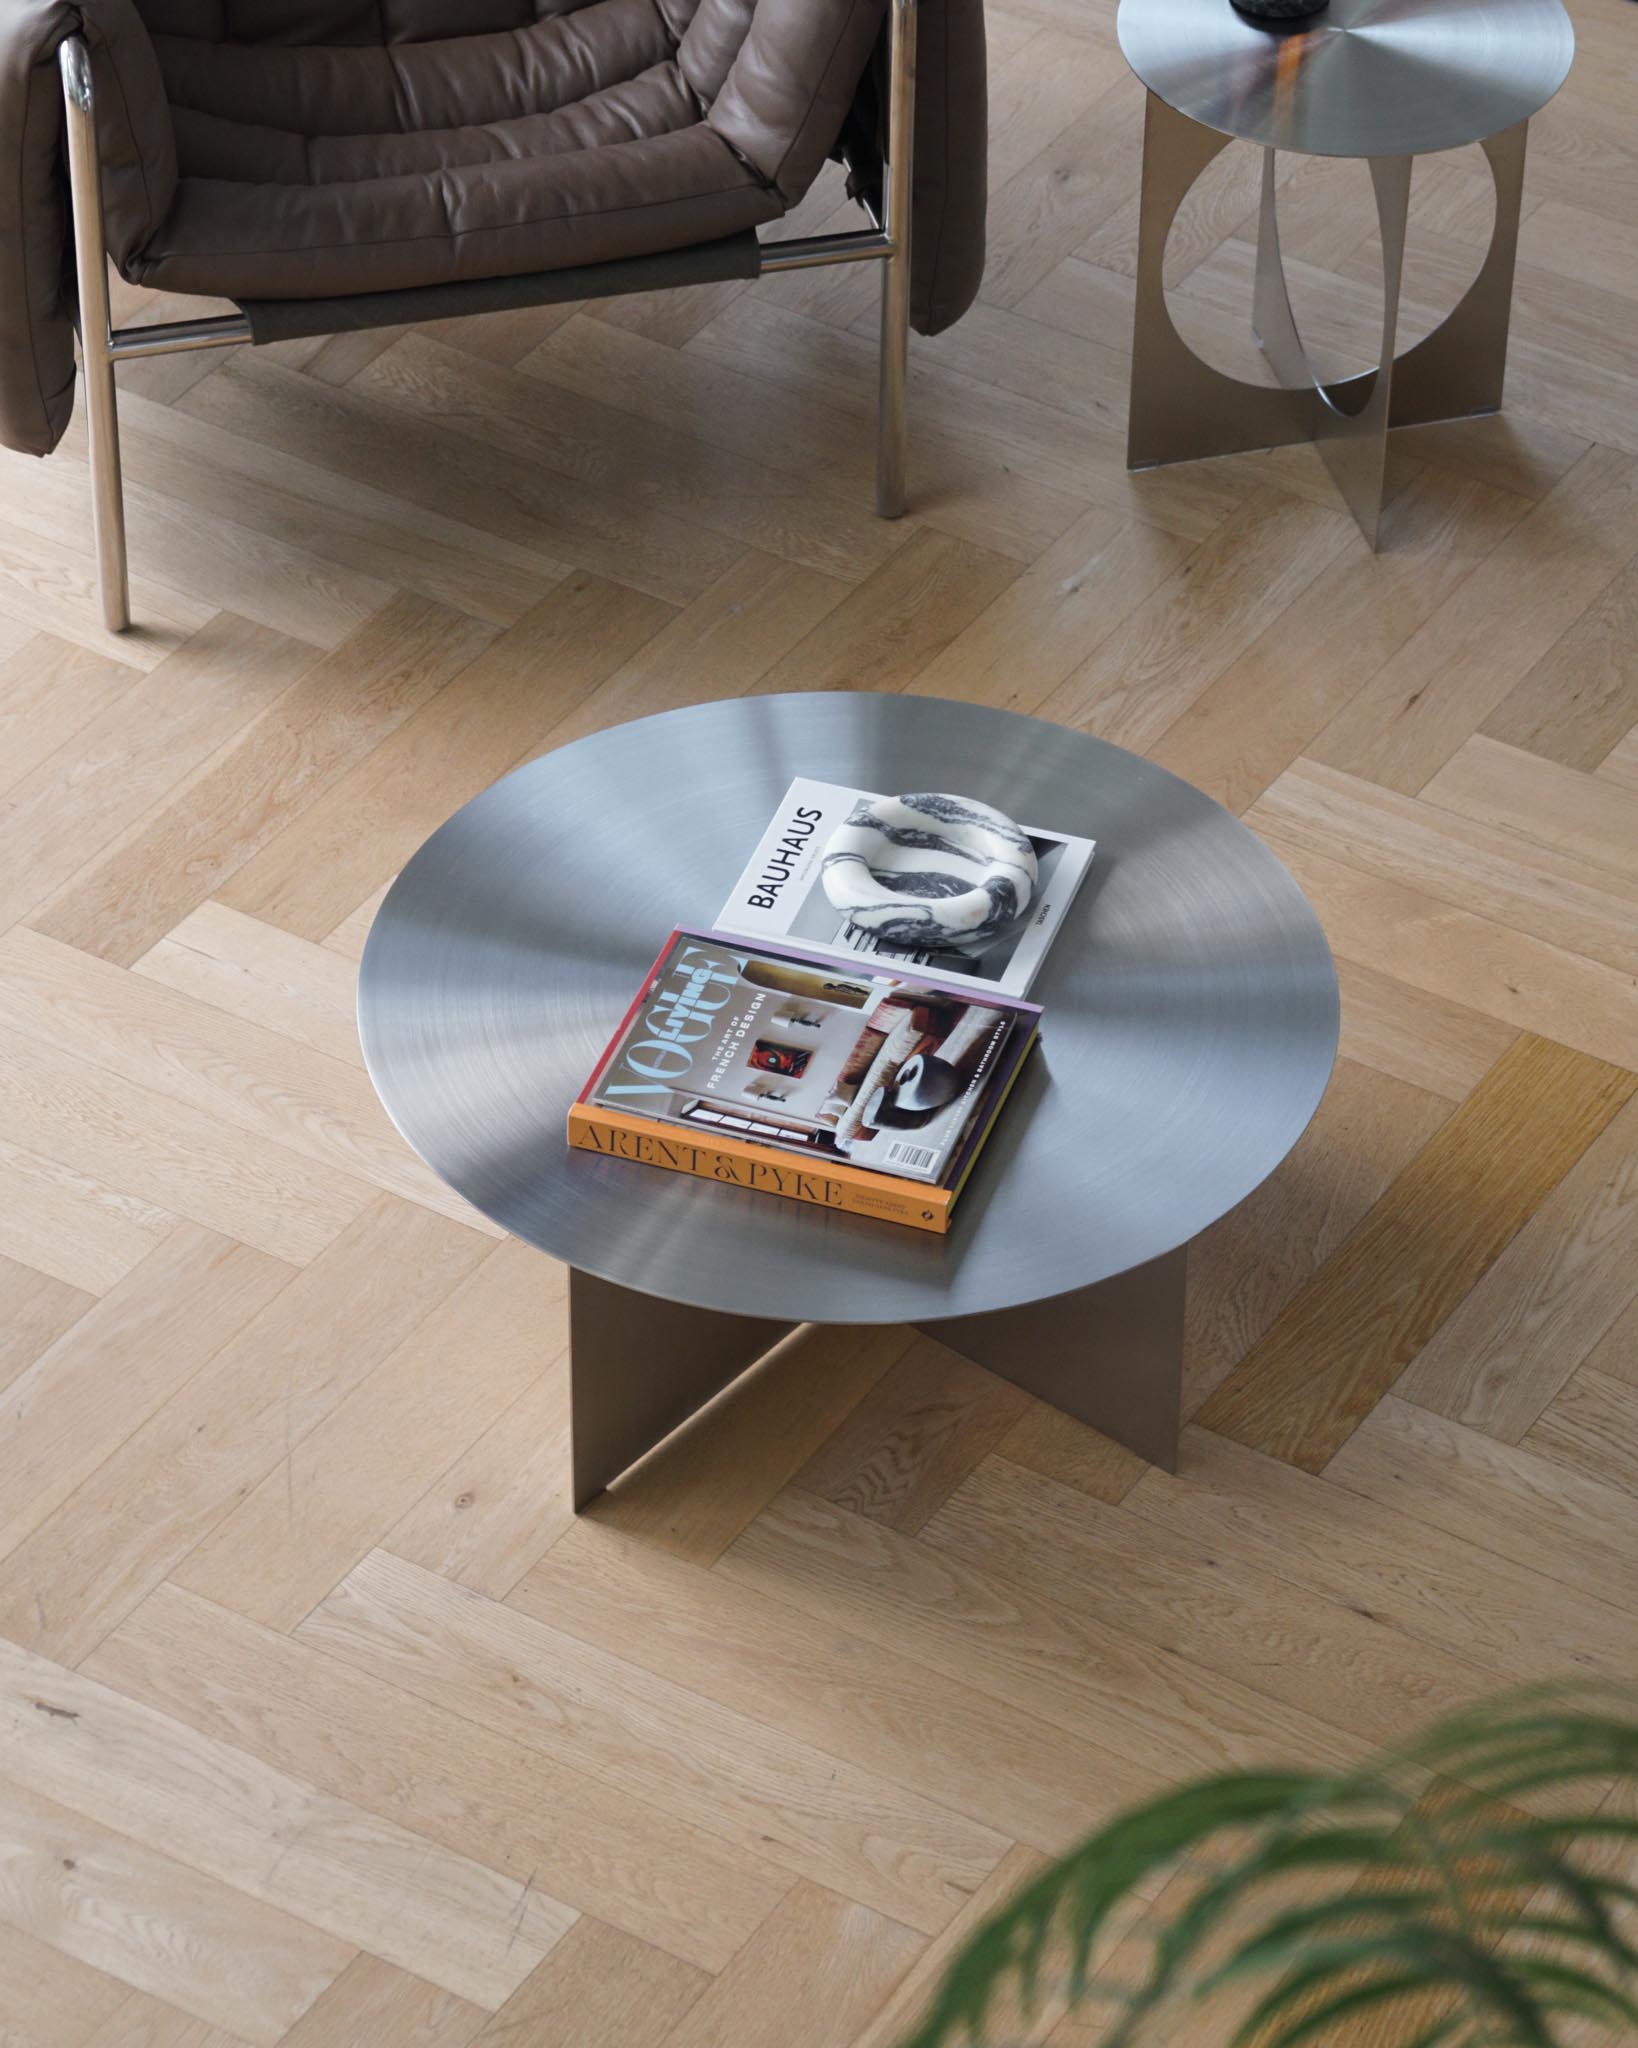 Palermo Stainless Steel Coffee Table